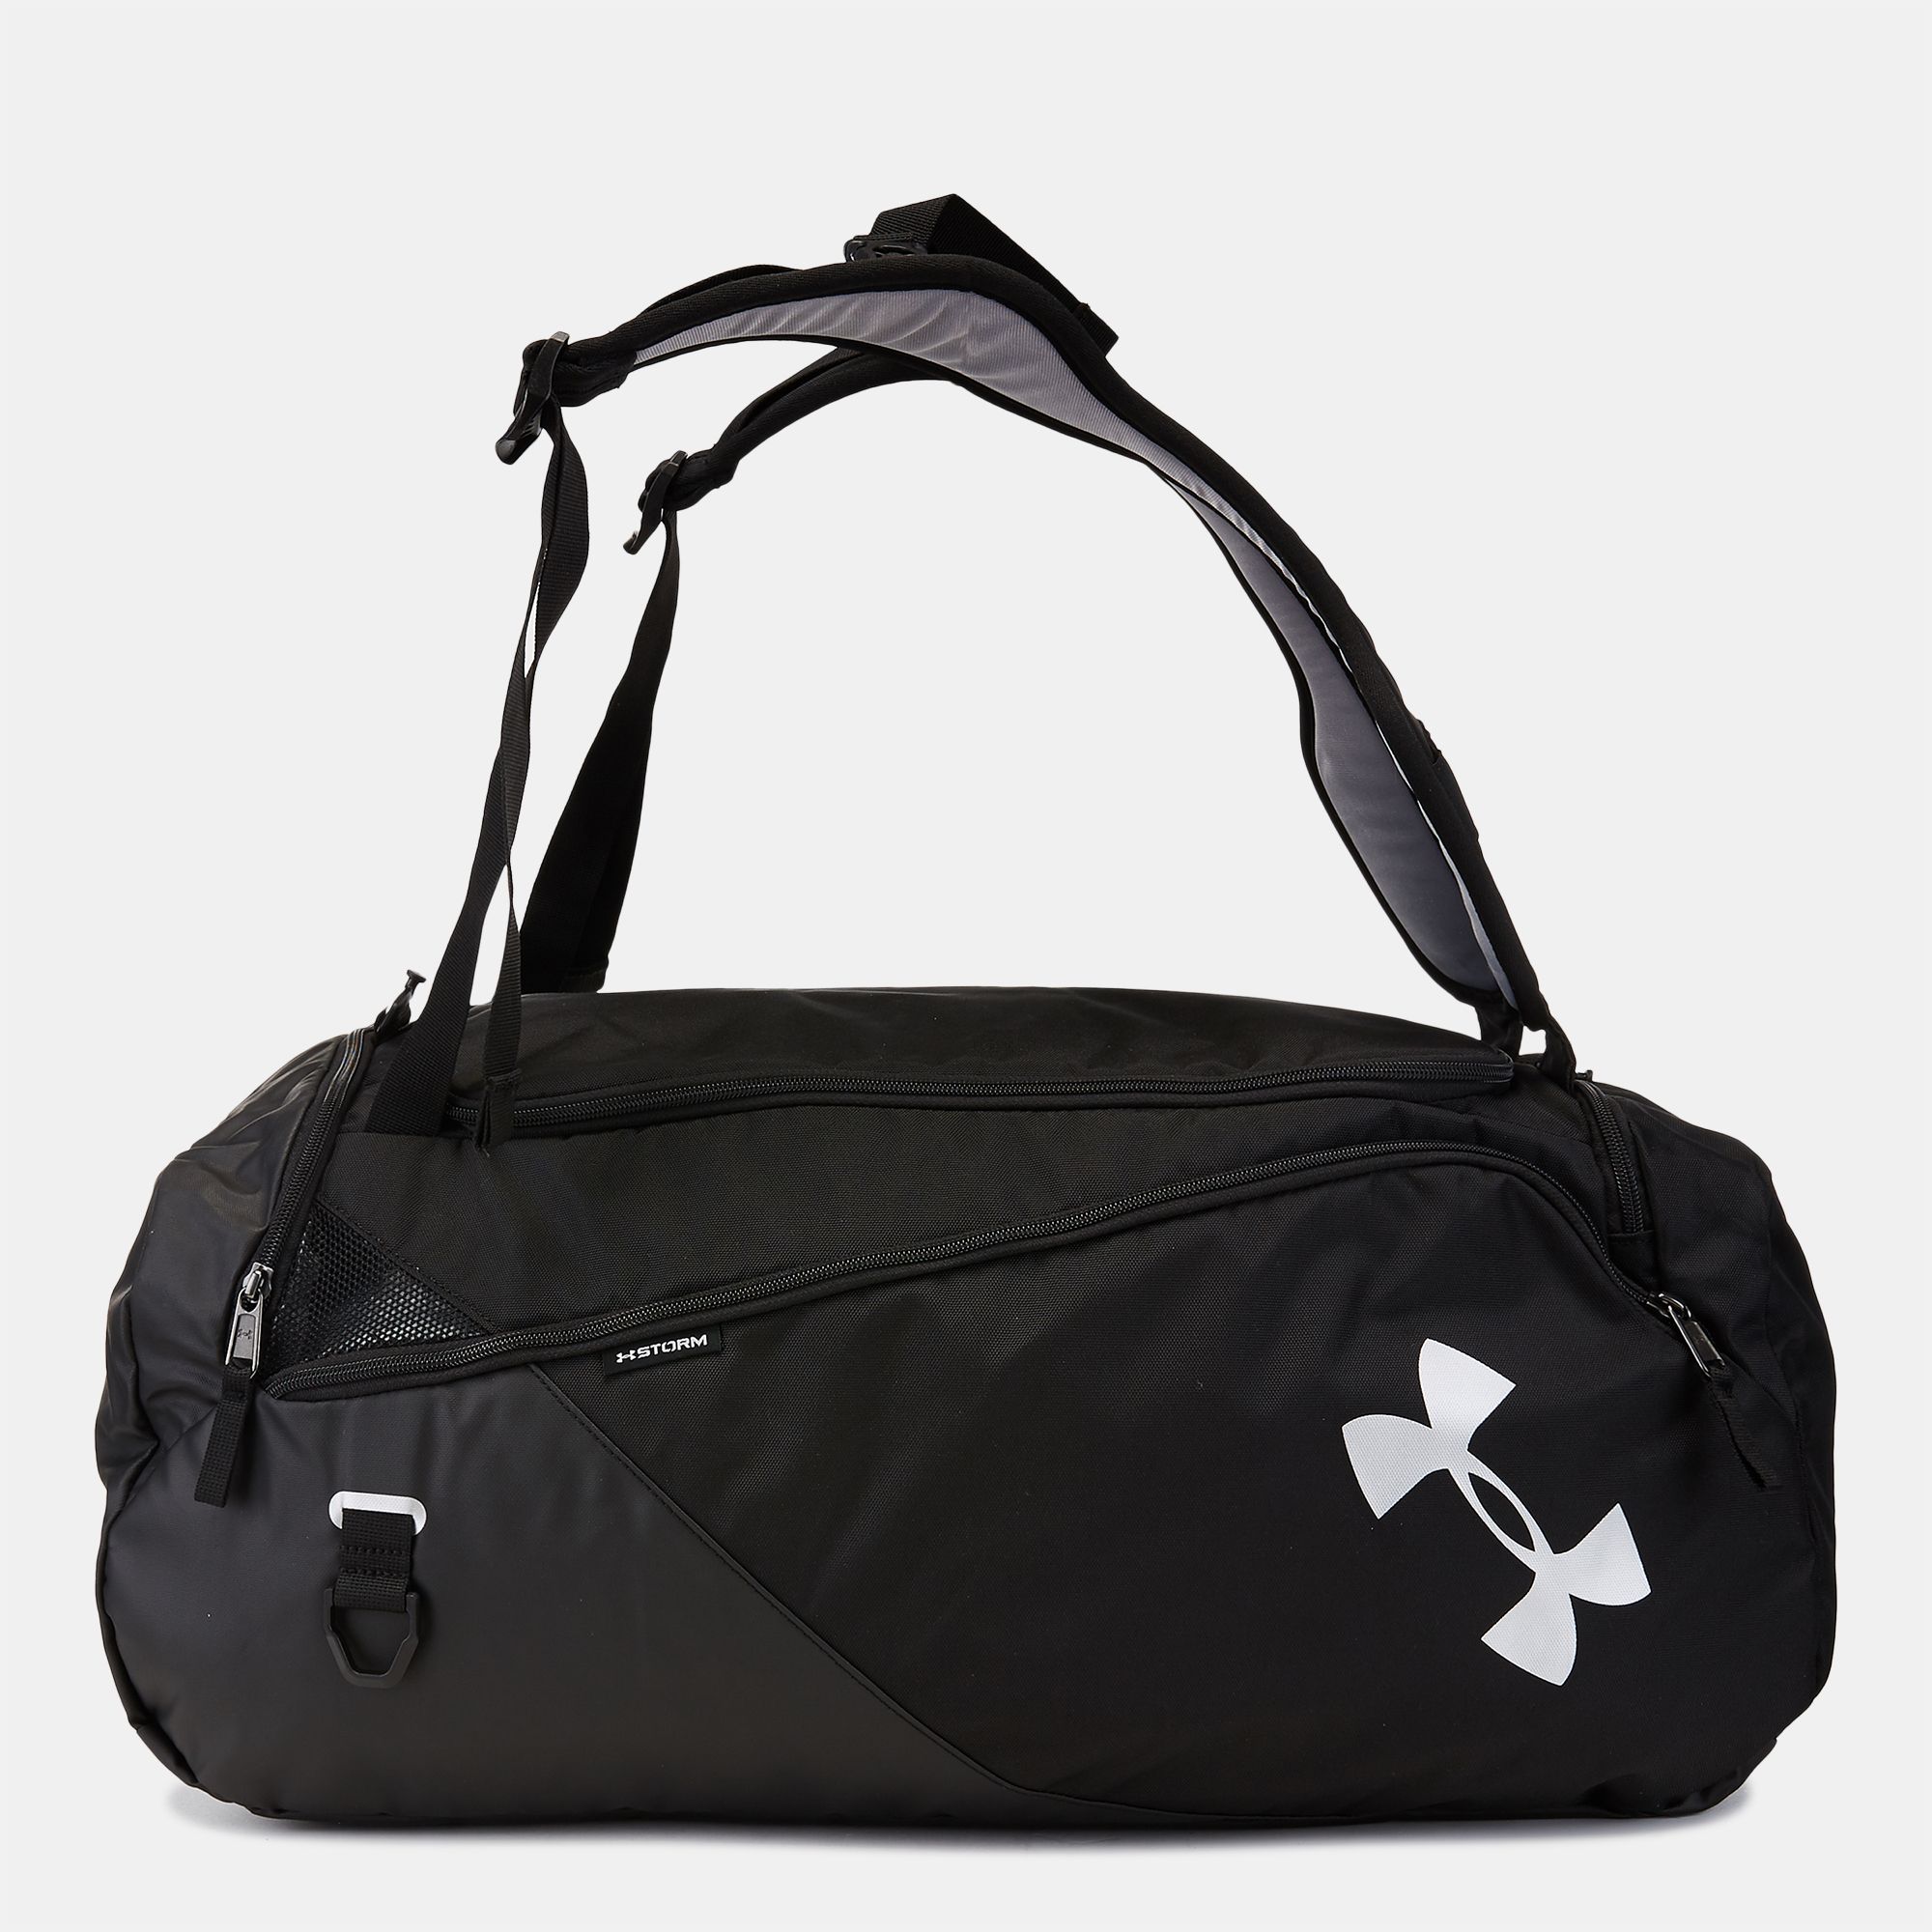 Storm Contain 4.0 Backpack Duffle 